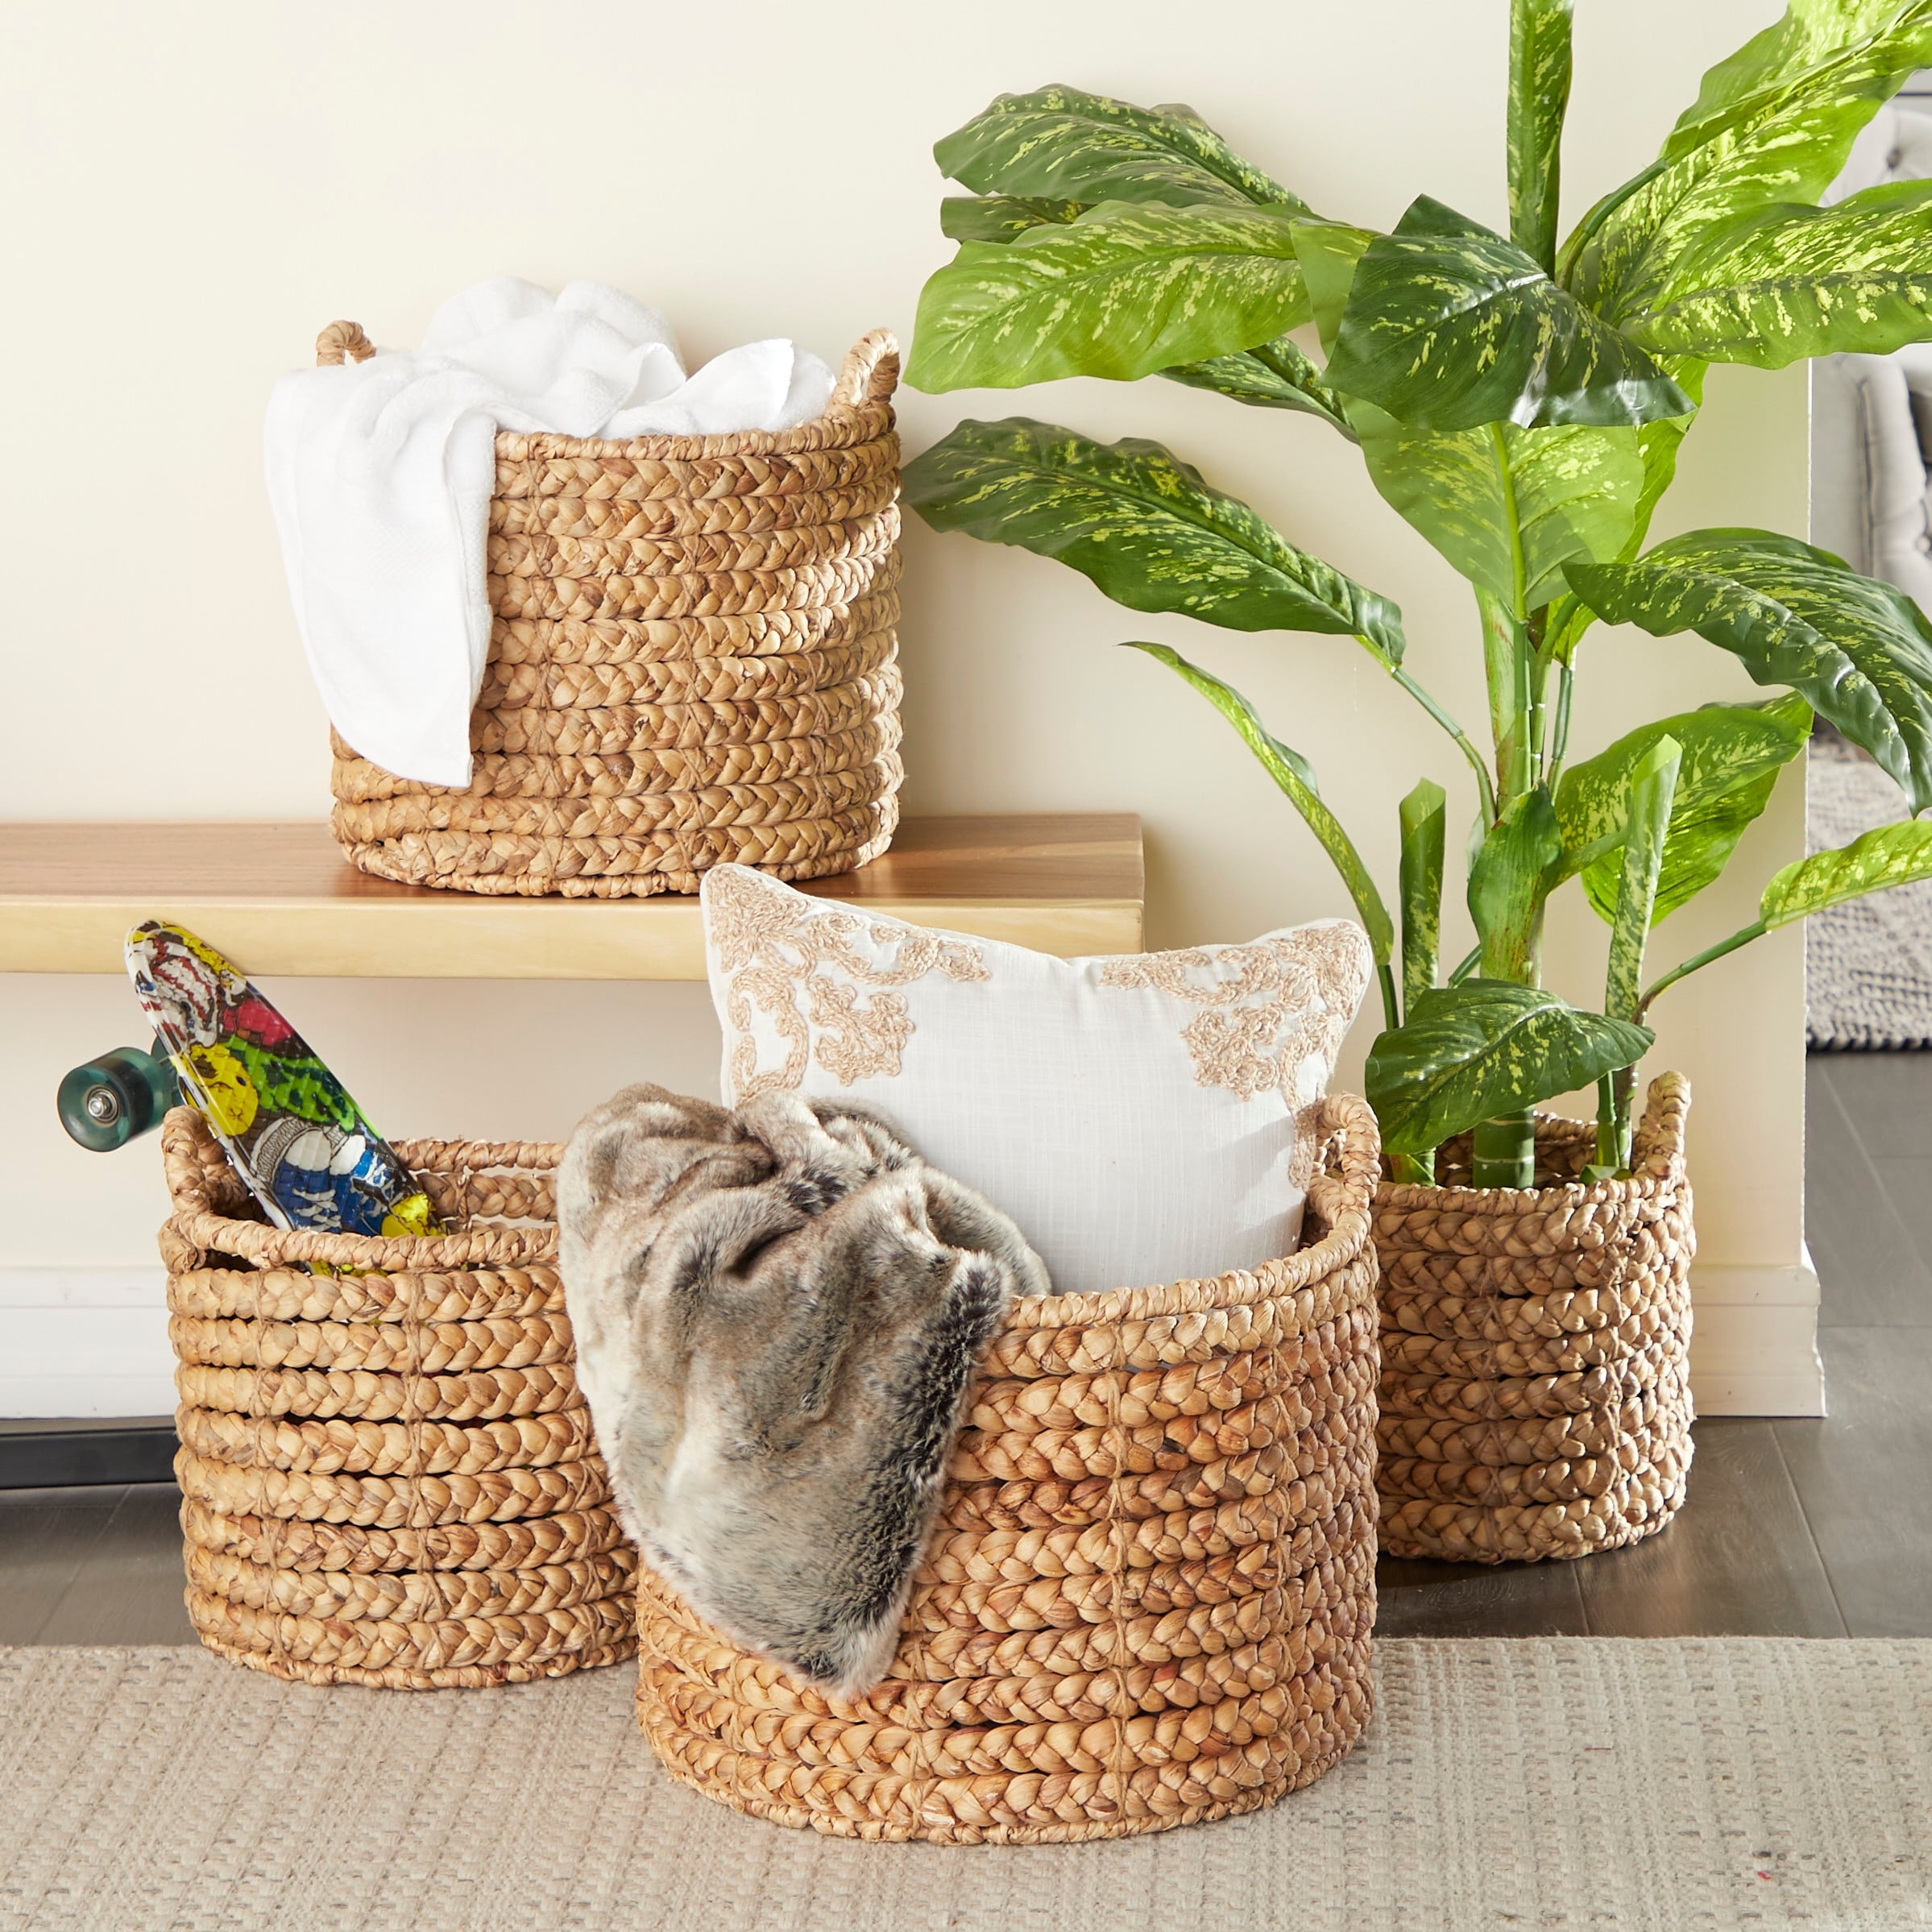 https://ak1.ostkcdn.com/images/products/is/images/direct/560ca9fc01c08ae067d582251f4beedb4a3594b2/Brown-Dried-Plant-Material-Coastal-Storage-Basket-%28Set-of-4%29.jpg